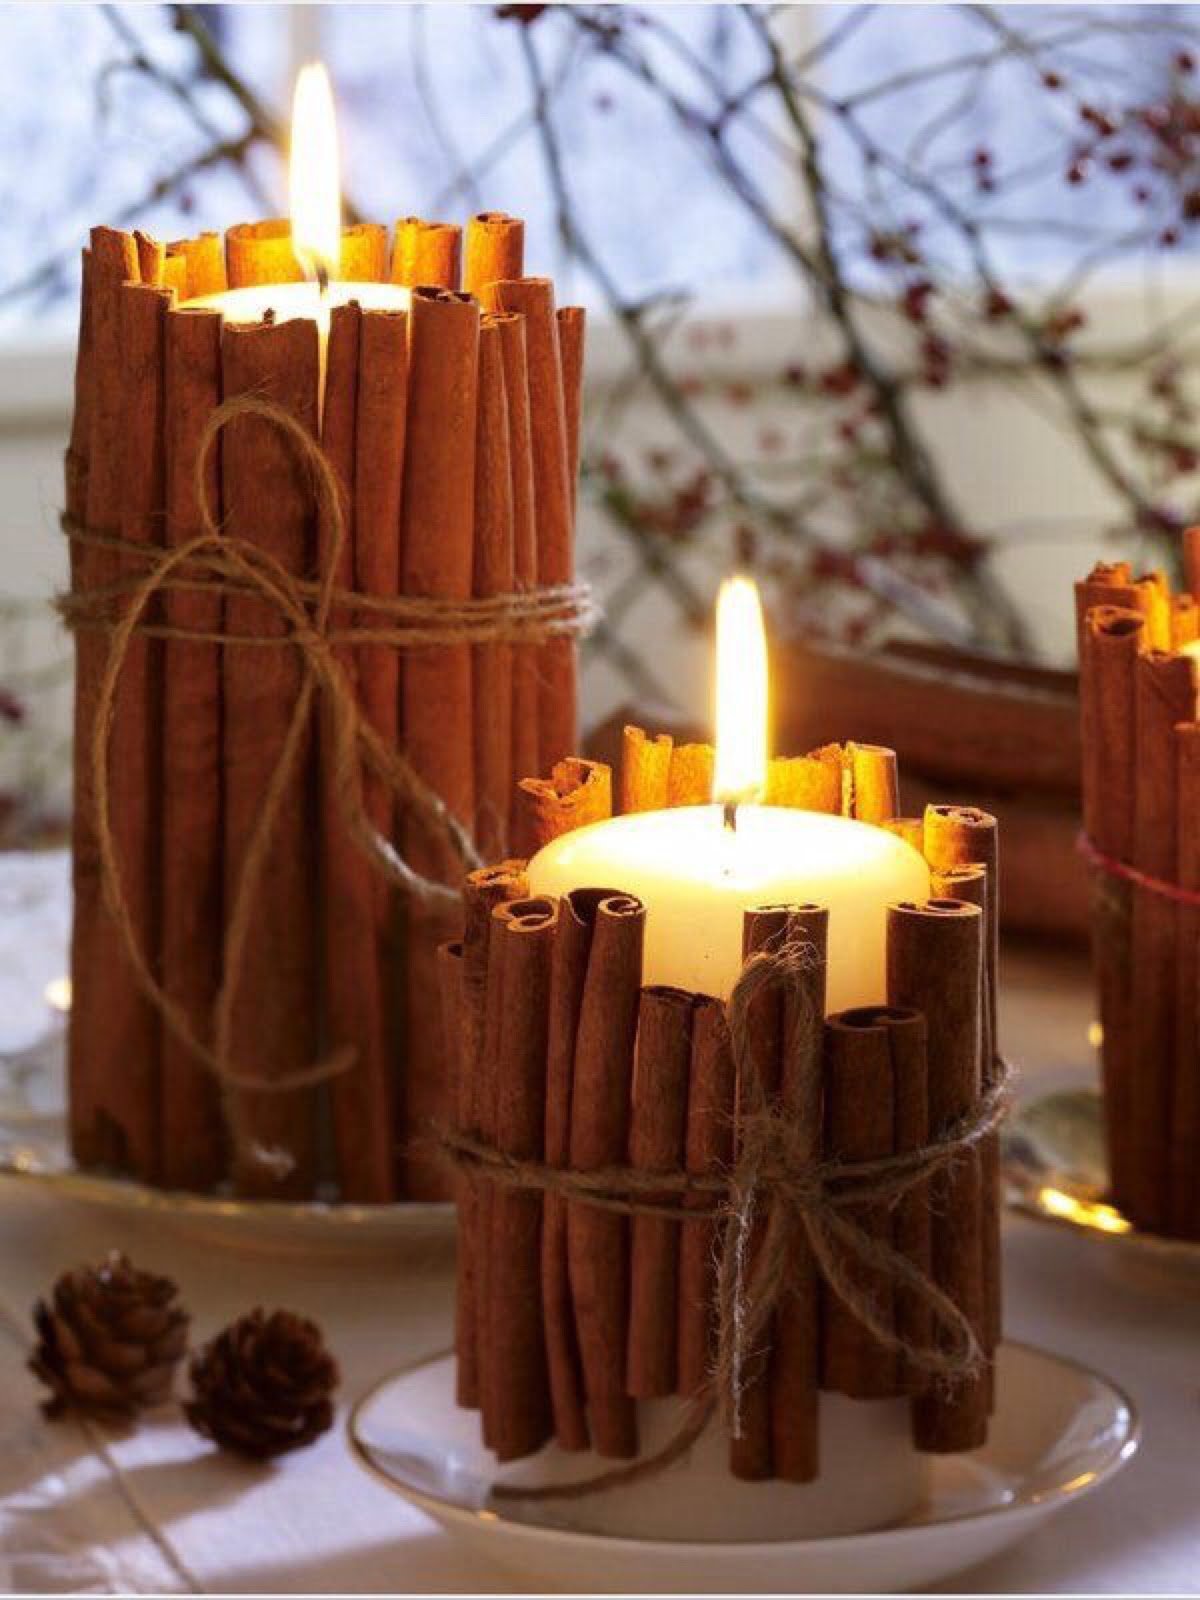 Naturally Scented Cinnamon Candles